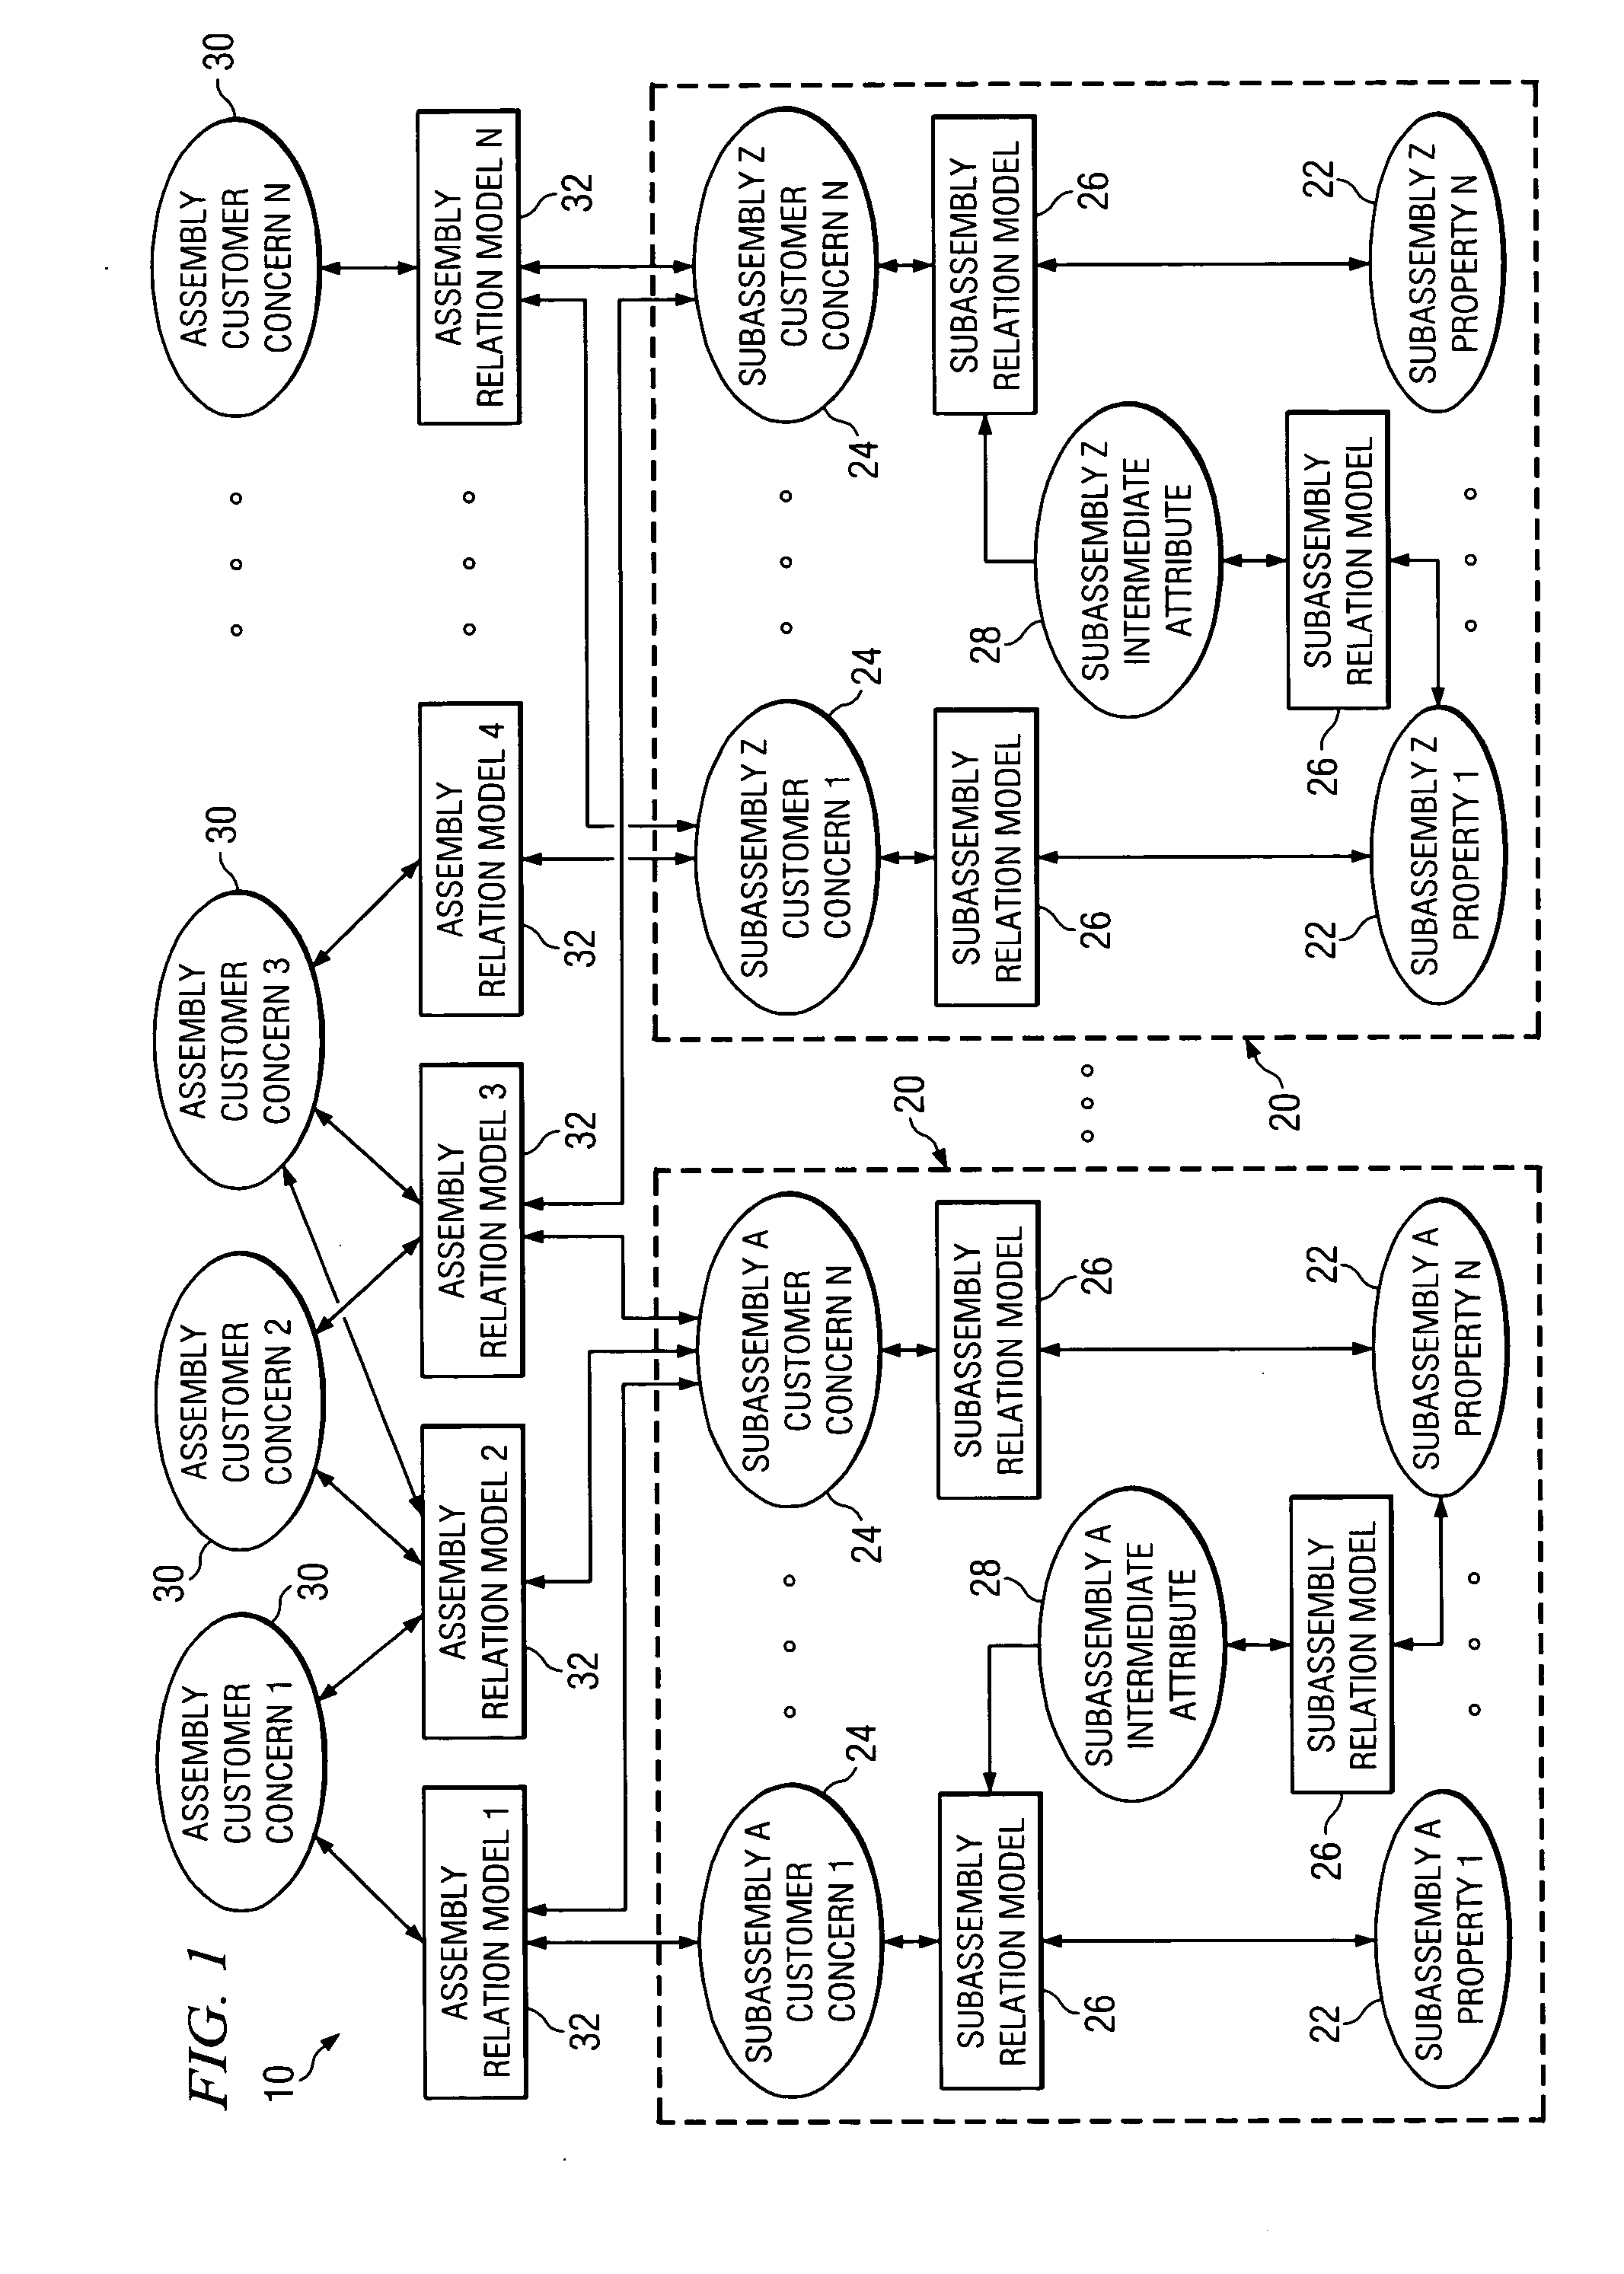 System, method, and software for relation-based product development